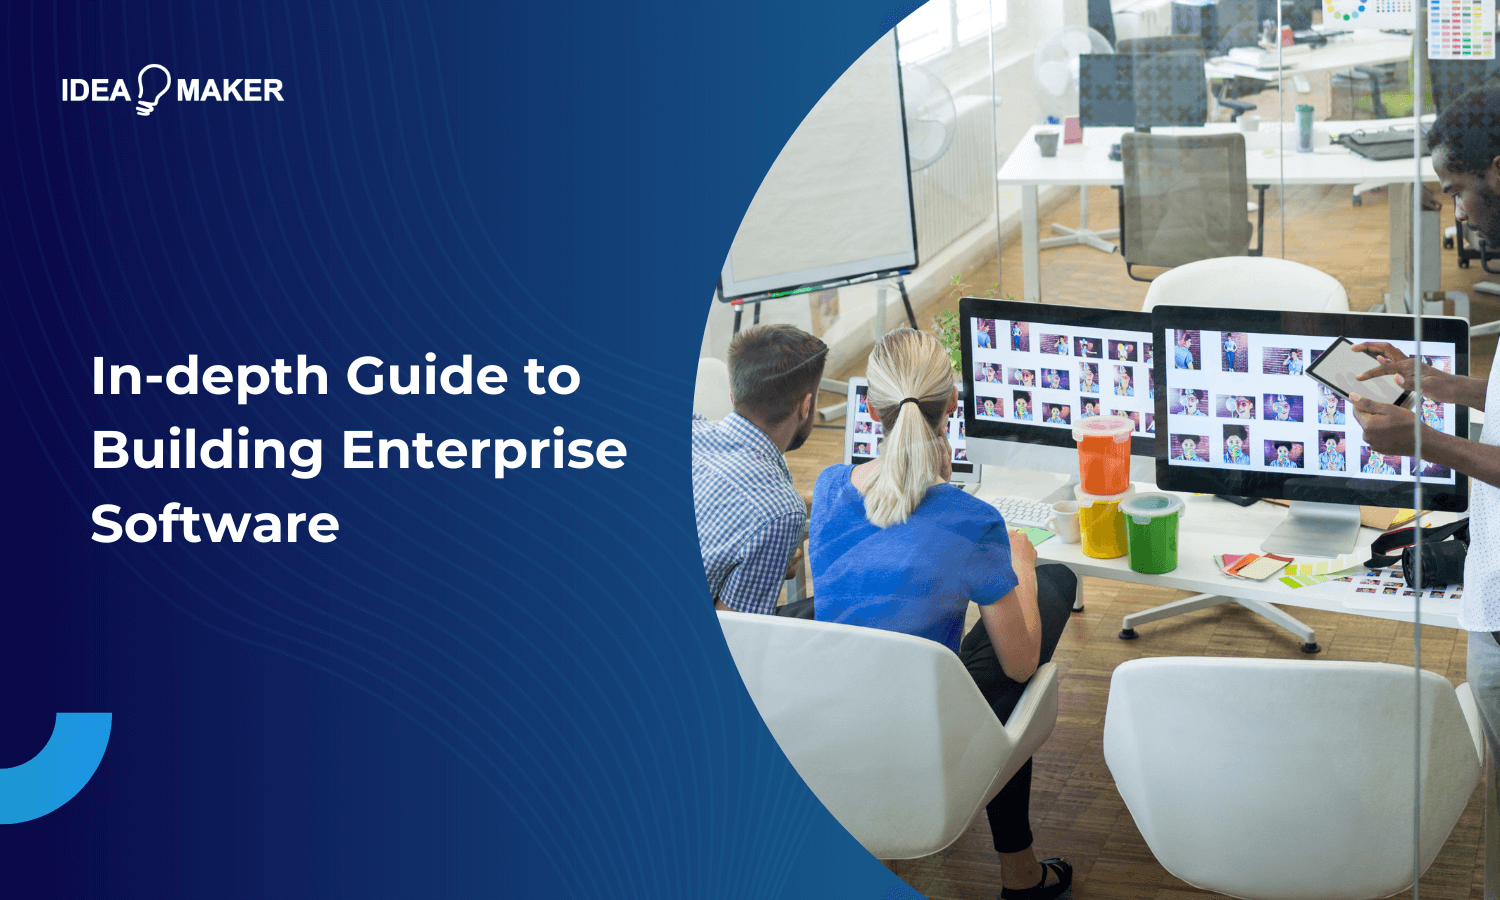 In-depth Guide to Building Enterprise Software